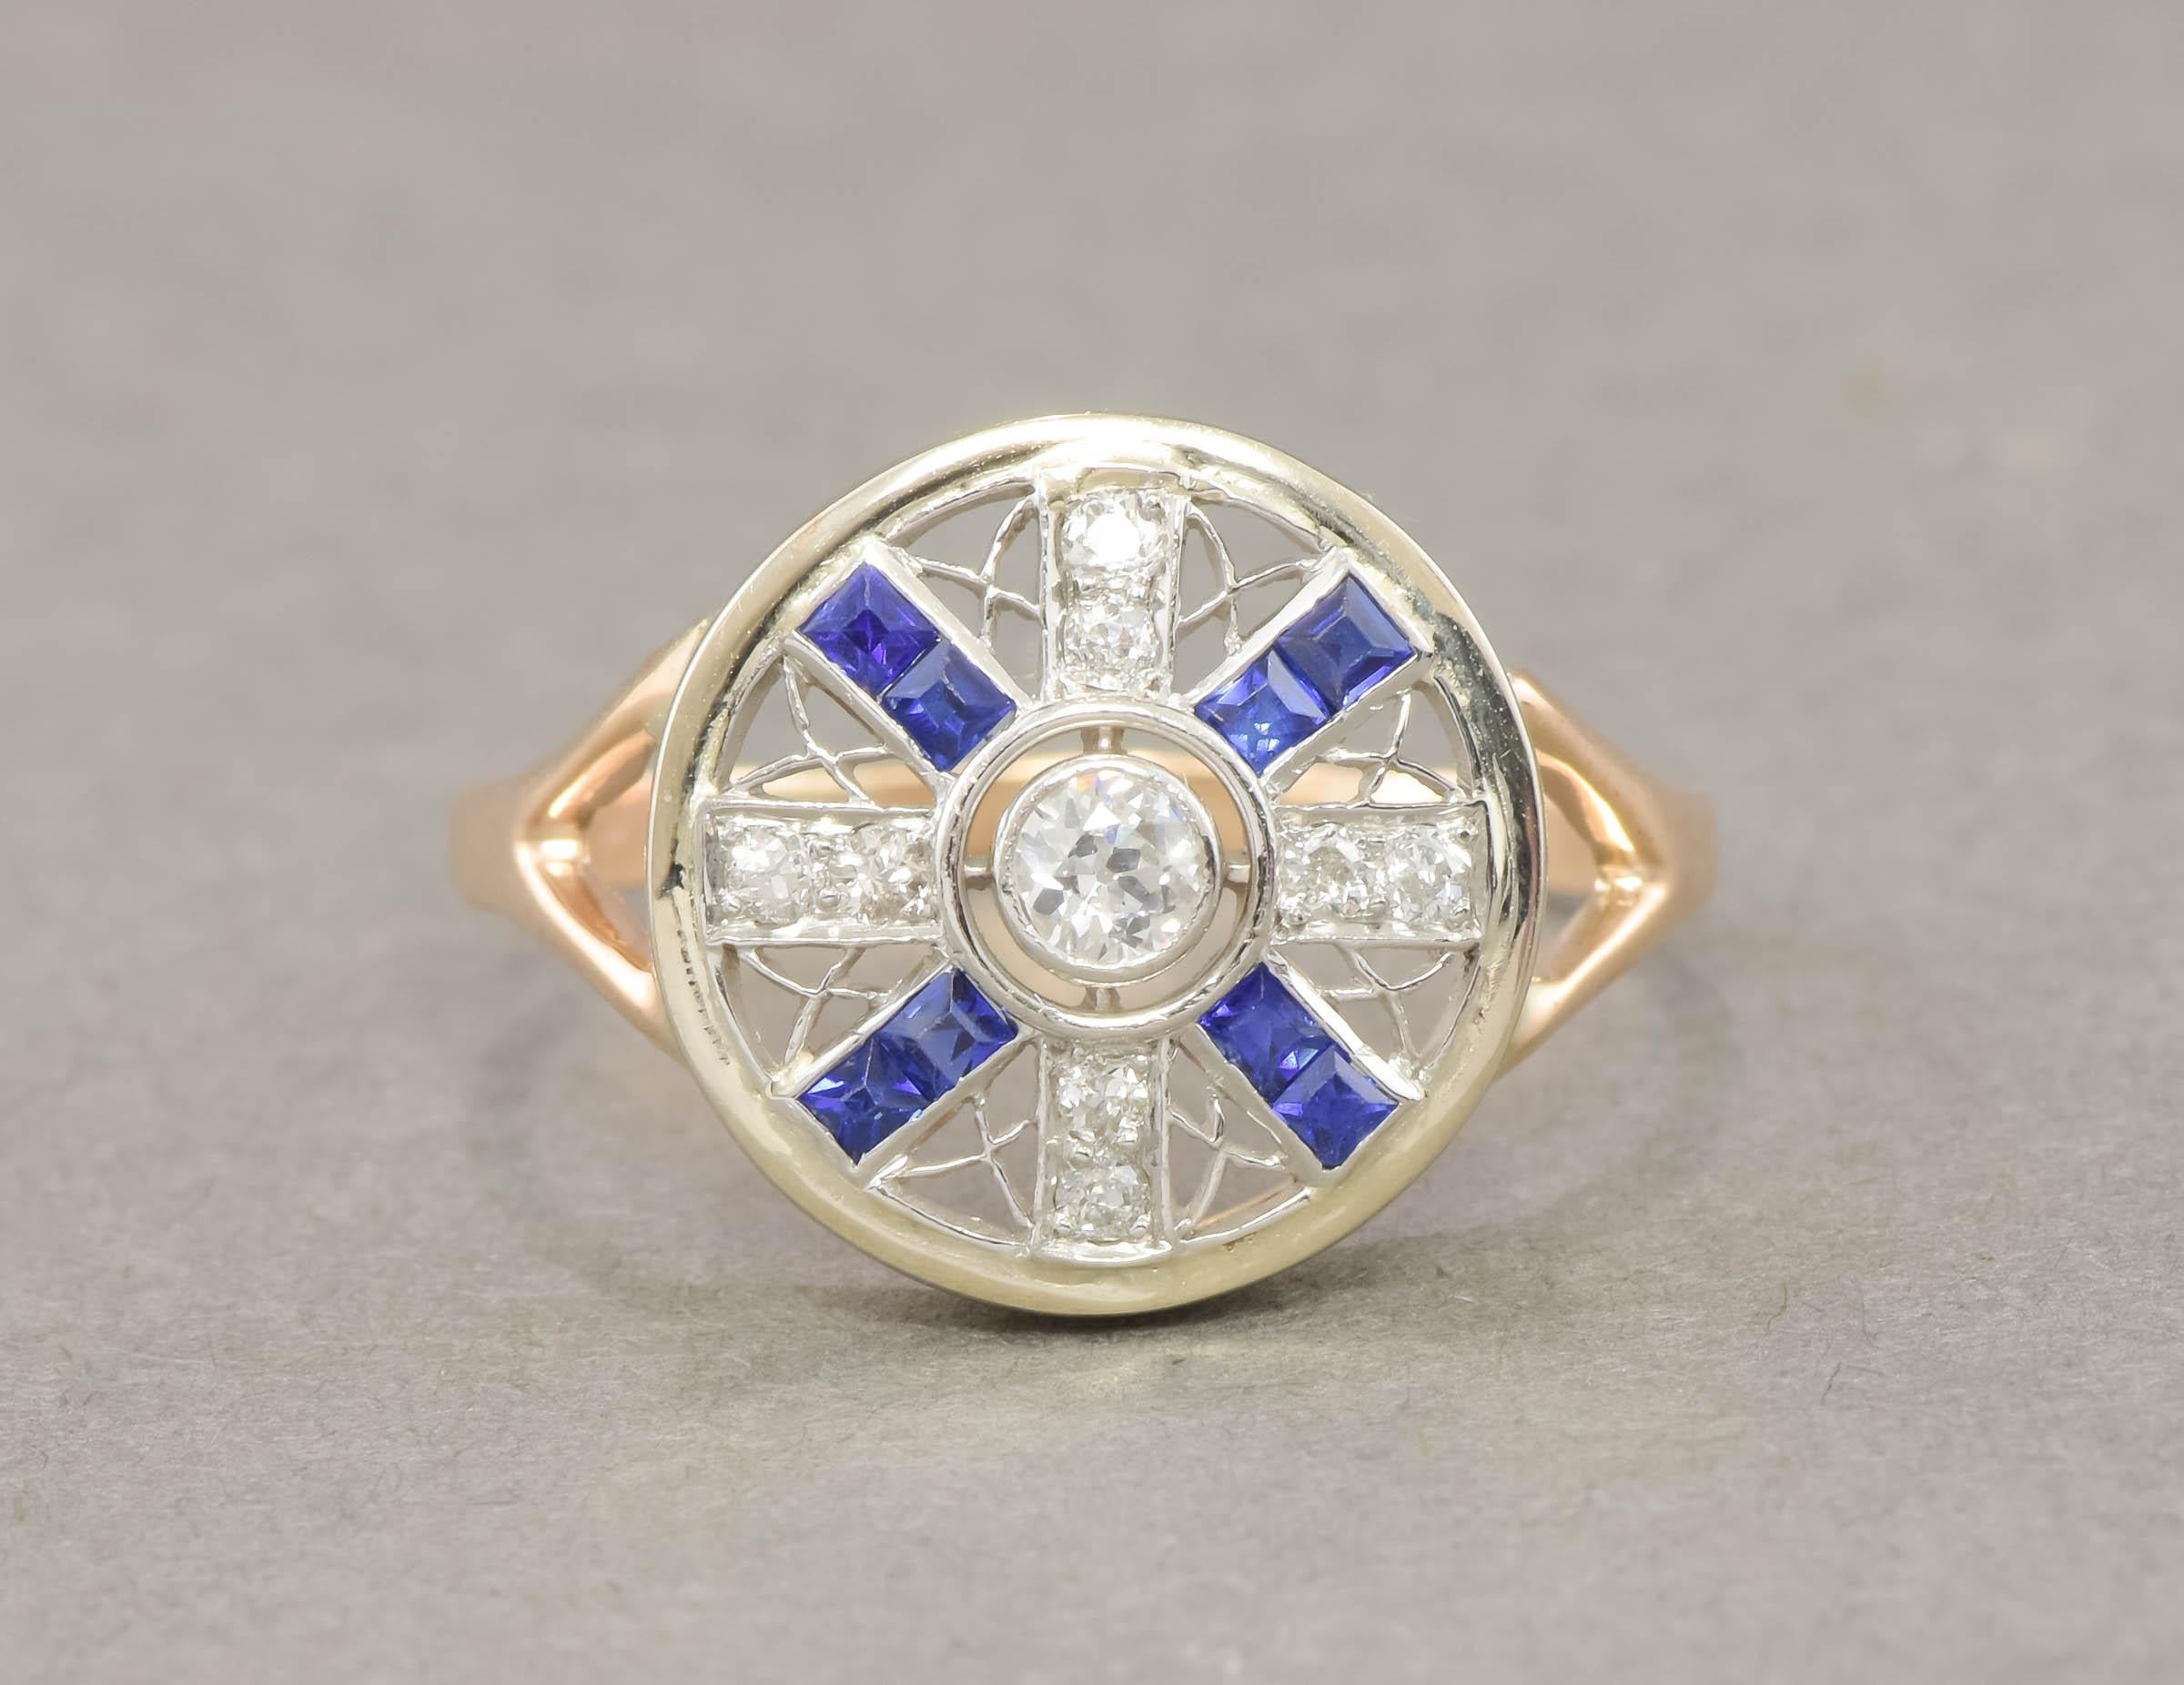 Dating to the Art Deco period, this old cut diamond and synthetic sapphire ring has a fantastic design and very striking presence on the hand.

Crafted of platinum & 14K yellow and white gold, the ring features a striking filigree geometric design